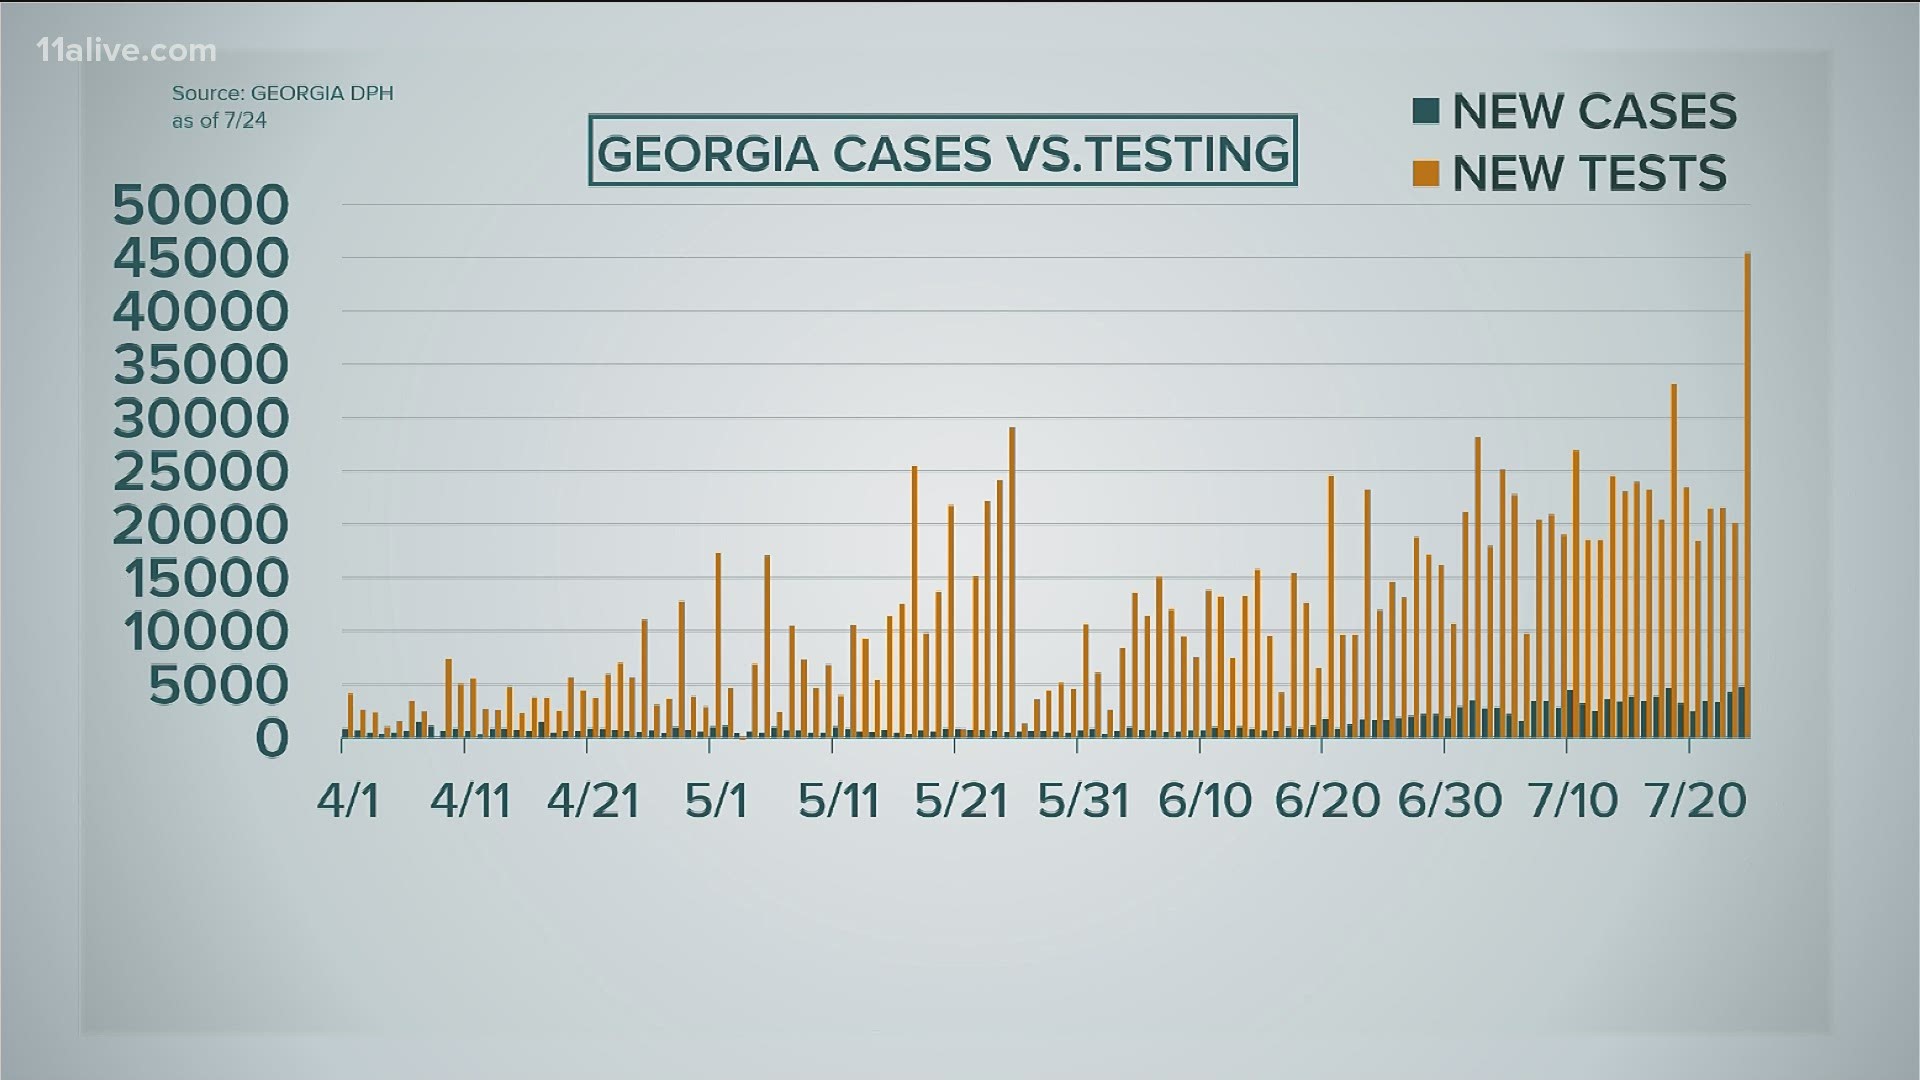 Here's what we know about COVID-19 cases in Georgia on July 24, 2020